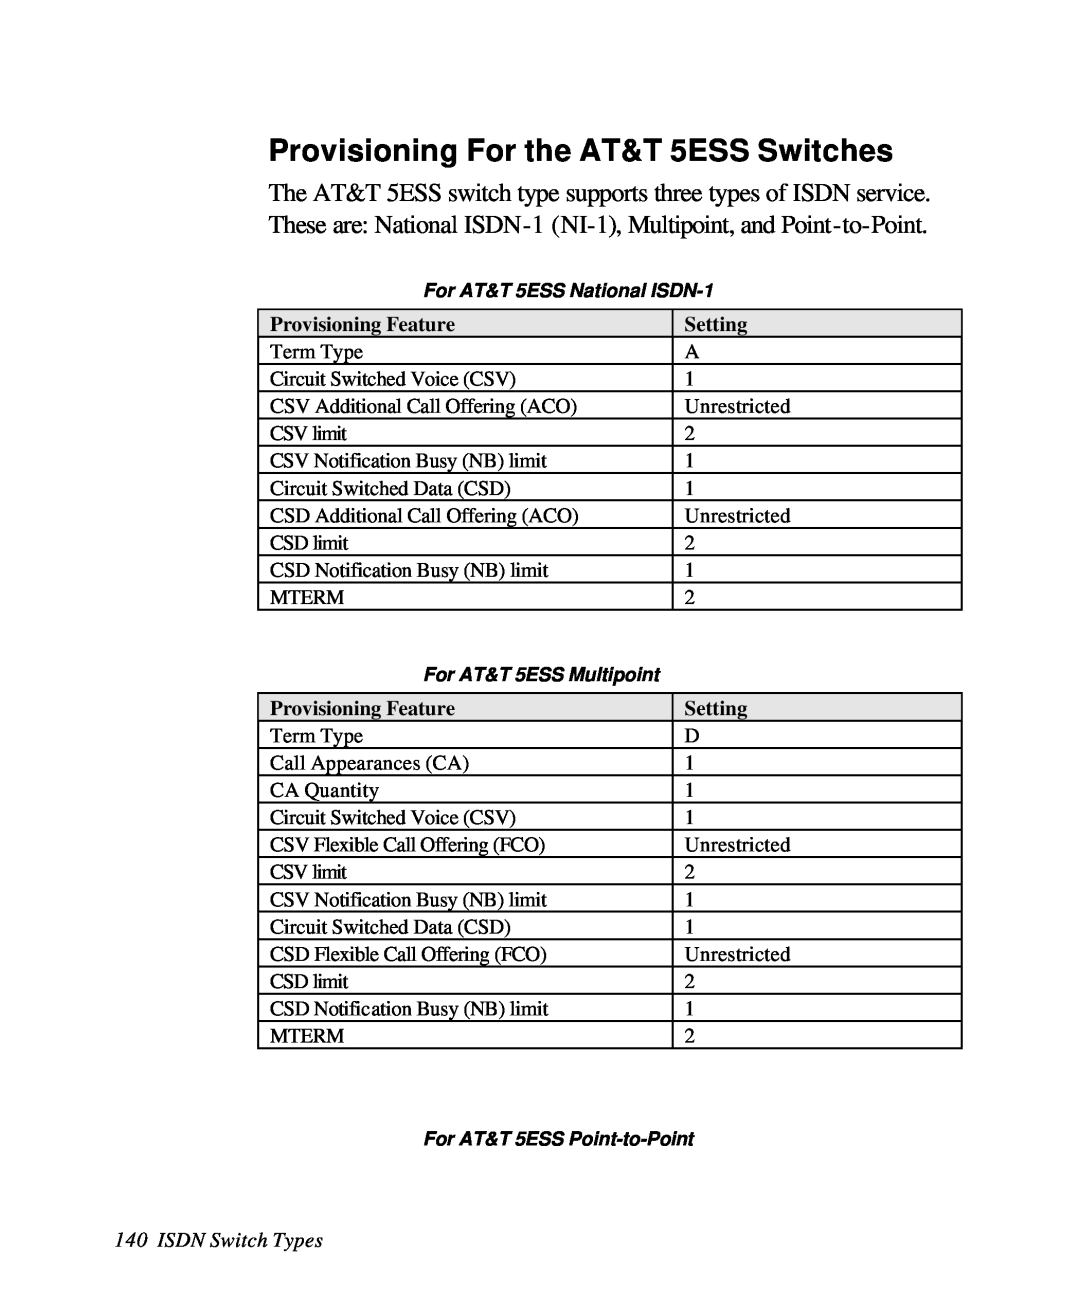 ZyXEL Communications 28641 Provisioning For the AT&T 5ESS Switches, Provisioning Feature, Setting, ISDN Switch Types 